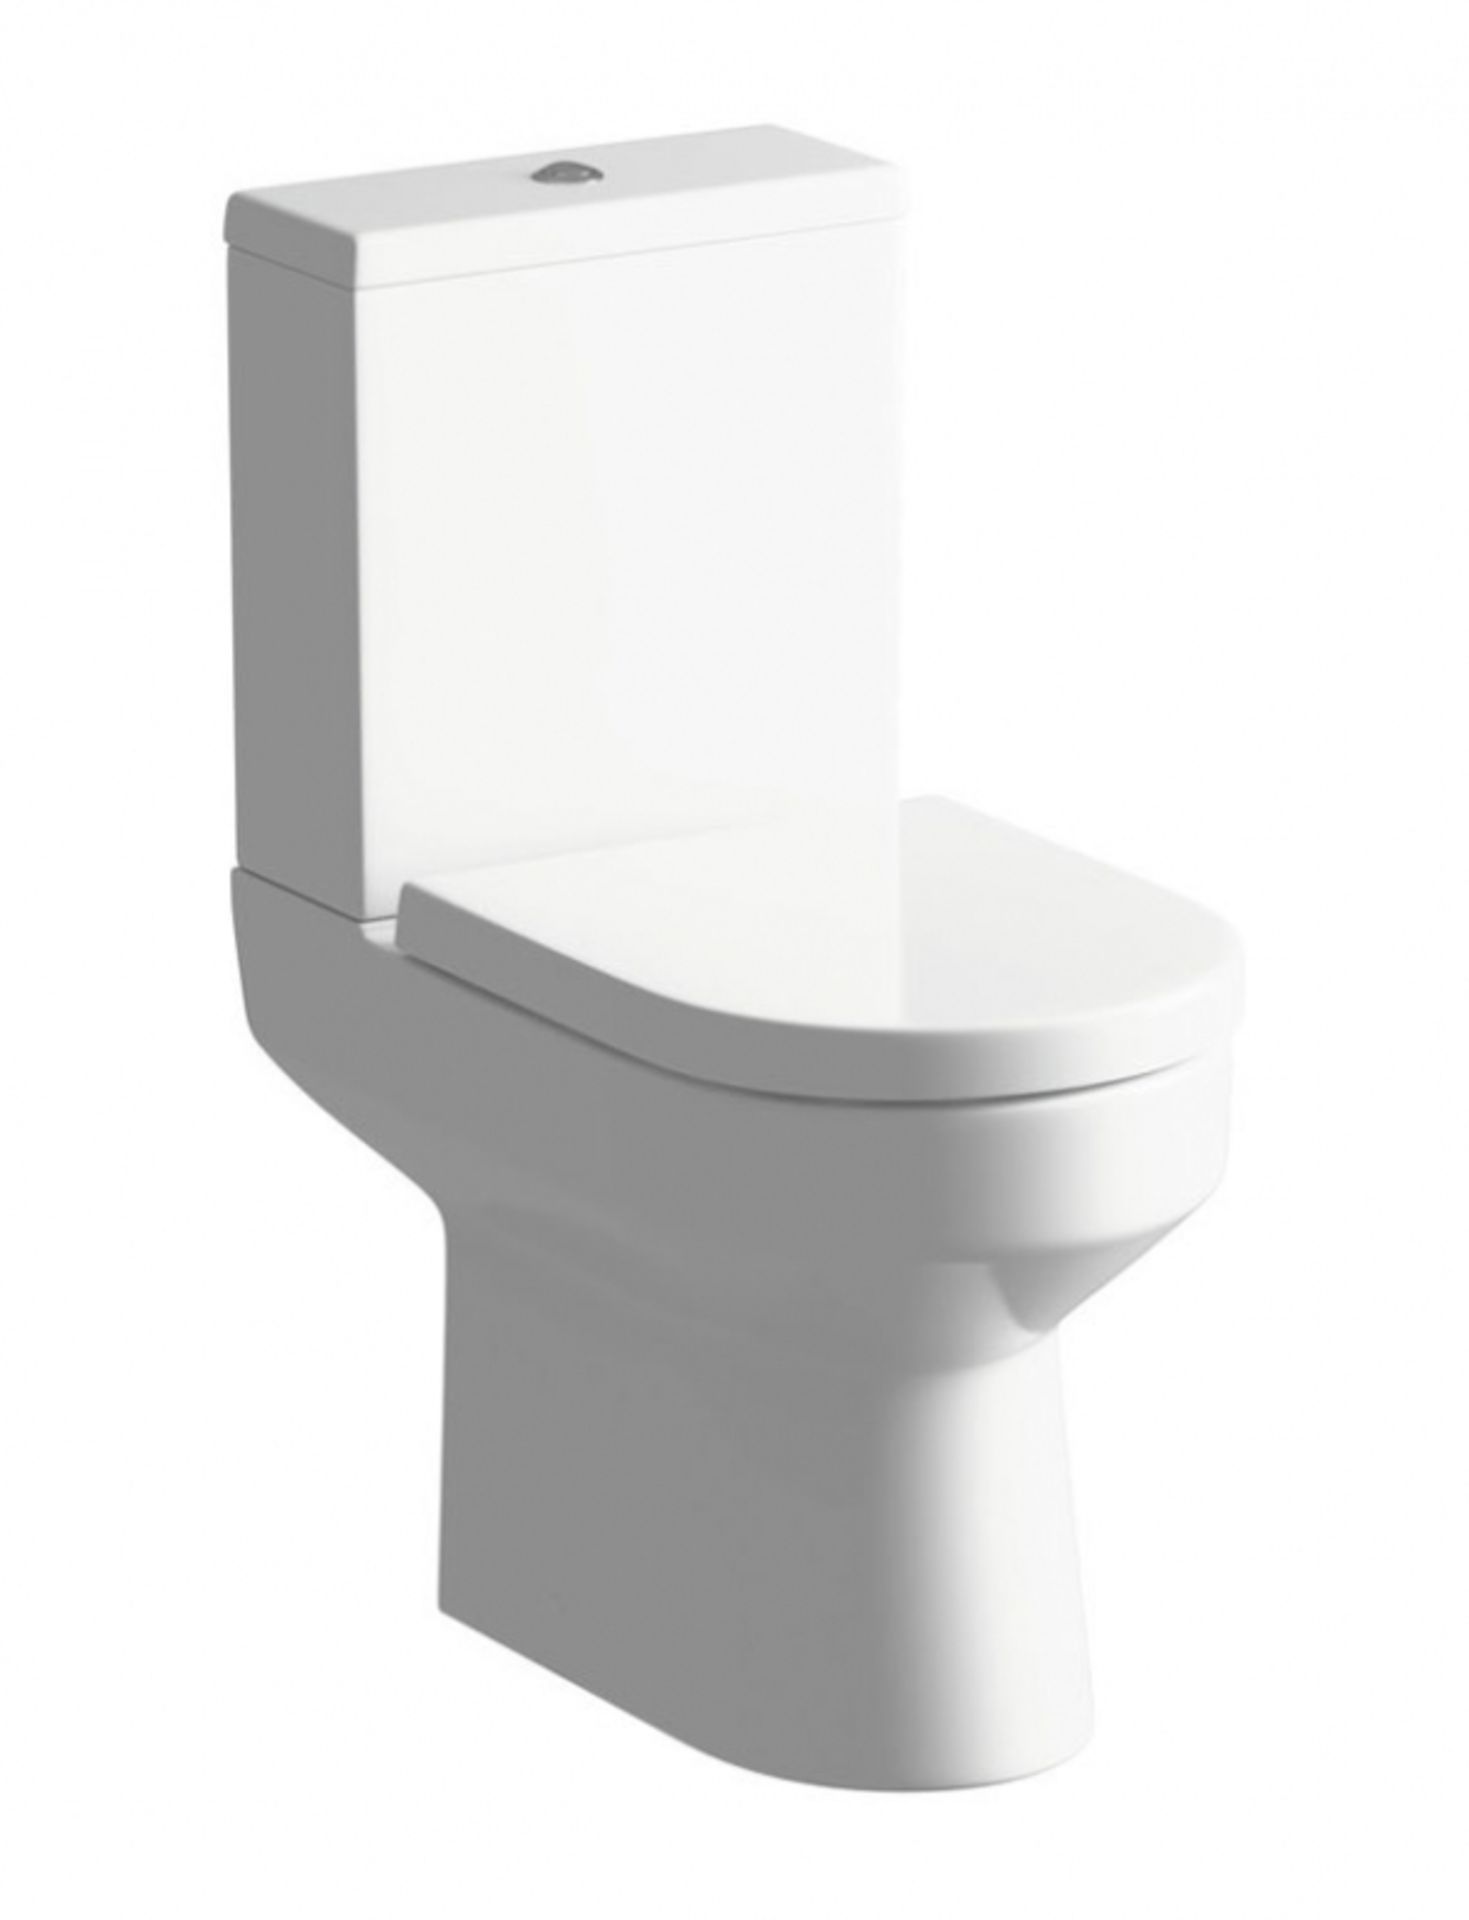 New & Boxed Lauruc Close Coupled Wc Inc Soft Close Toilet Seat. RRP £495.00.Close Coupled Wc ... - Image 2 of 3